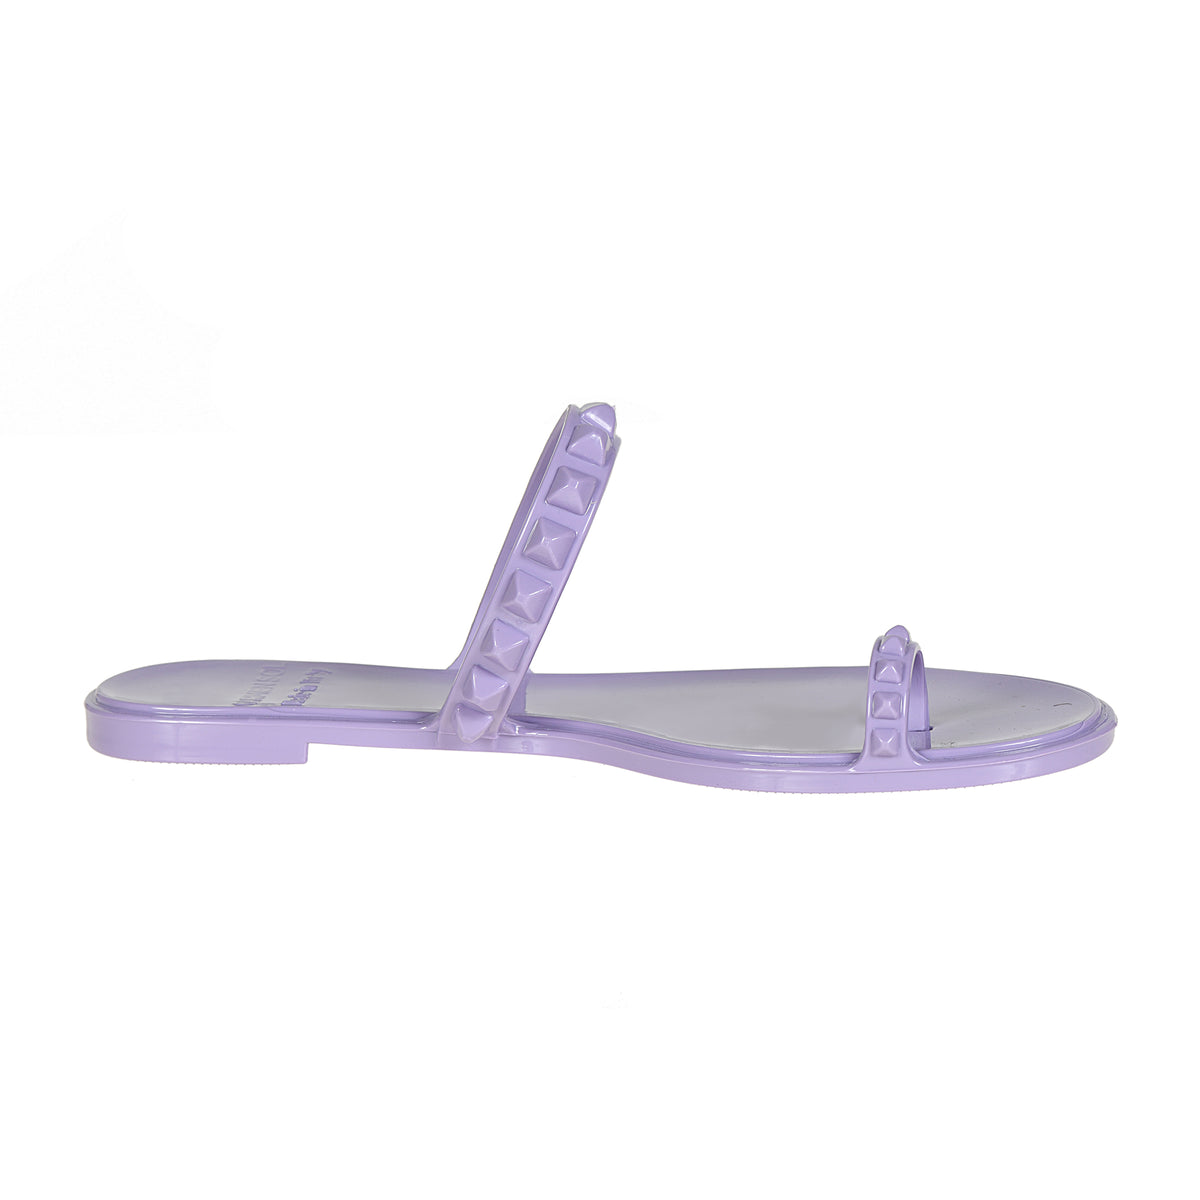 Carmen Sol sustainable jelly shoes in color violet